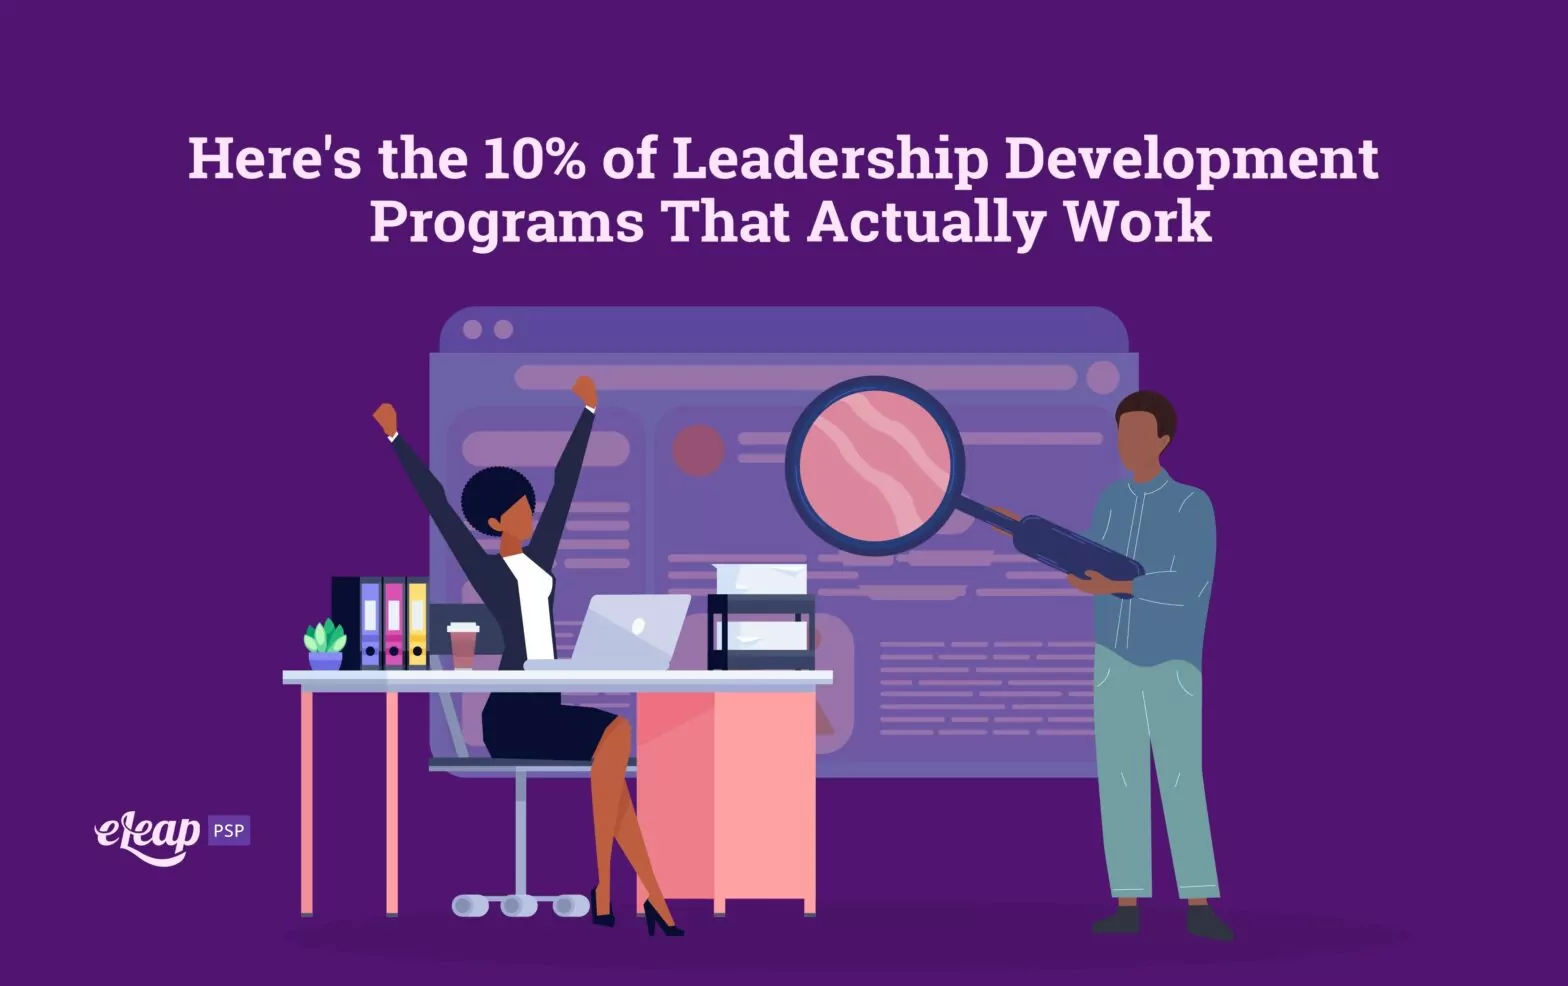 Here’s the 10% of Leadership Development Programs That Actually Work